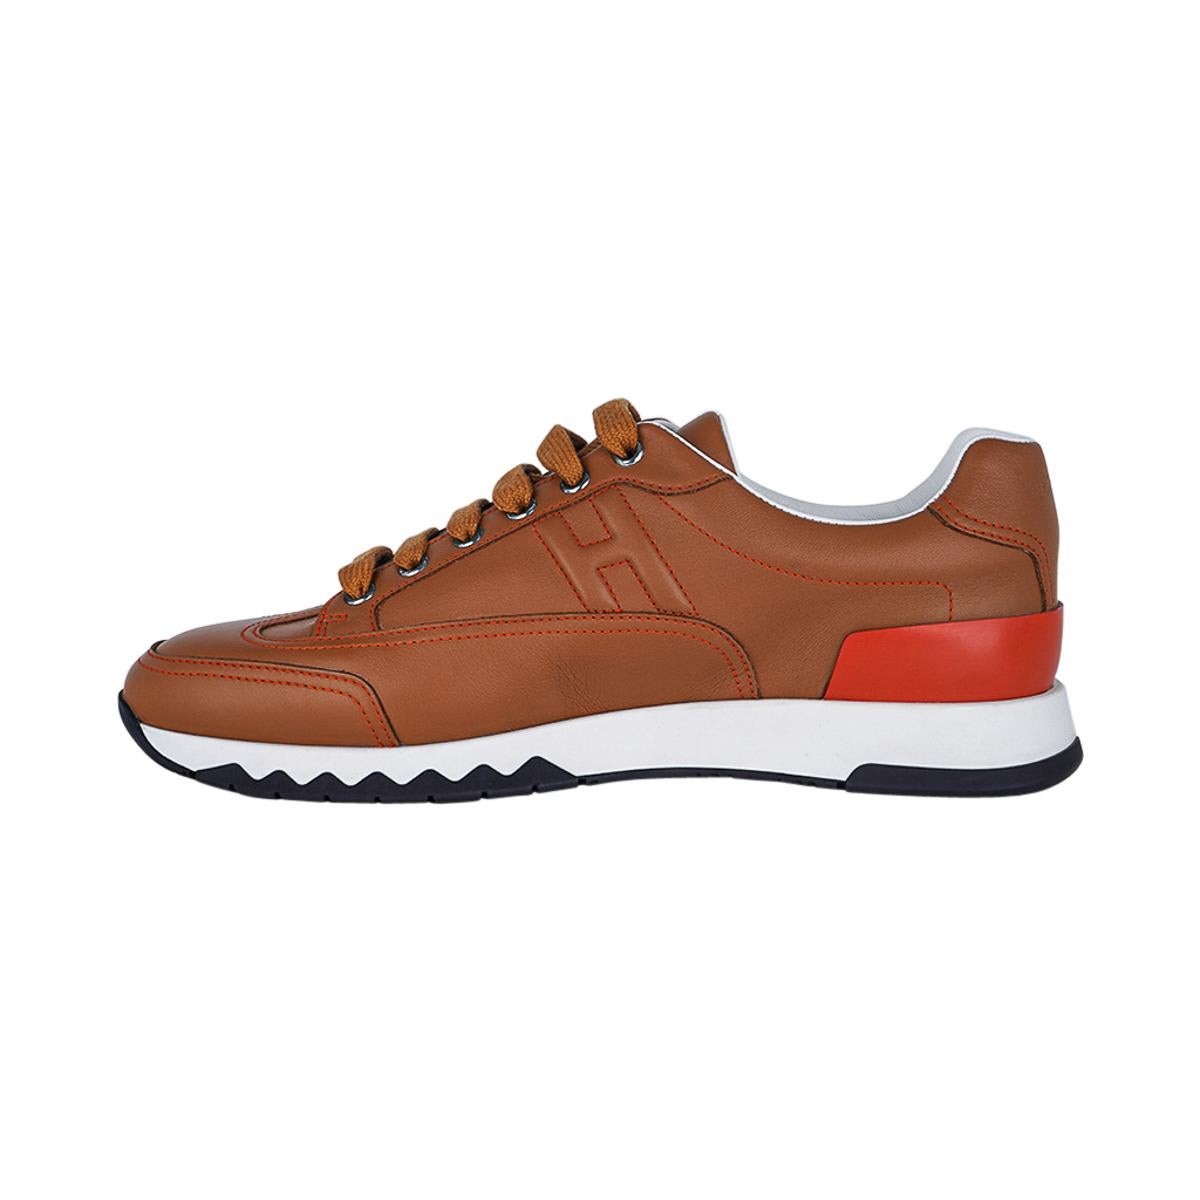 Hermes Trail Sneaker Gold Calfskin 39 / 9 In New Condition For Sale In Miami, FL